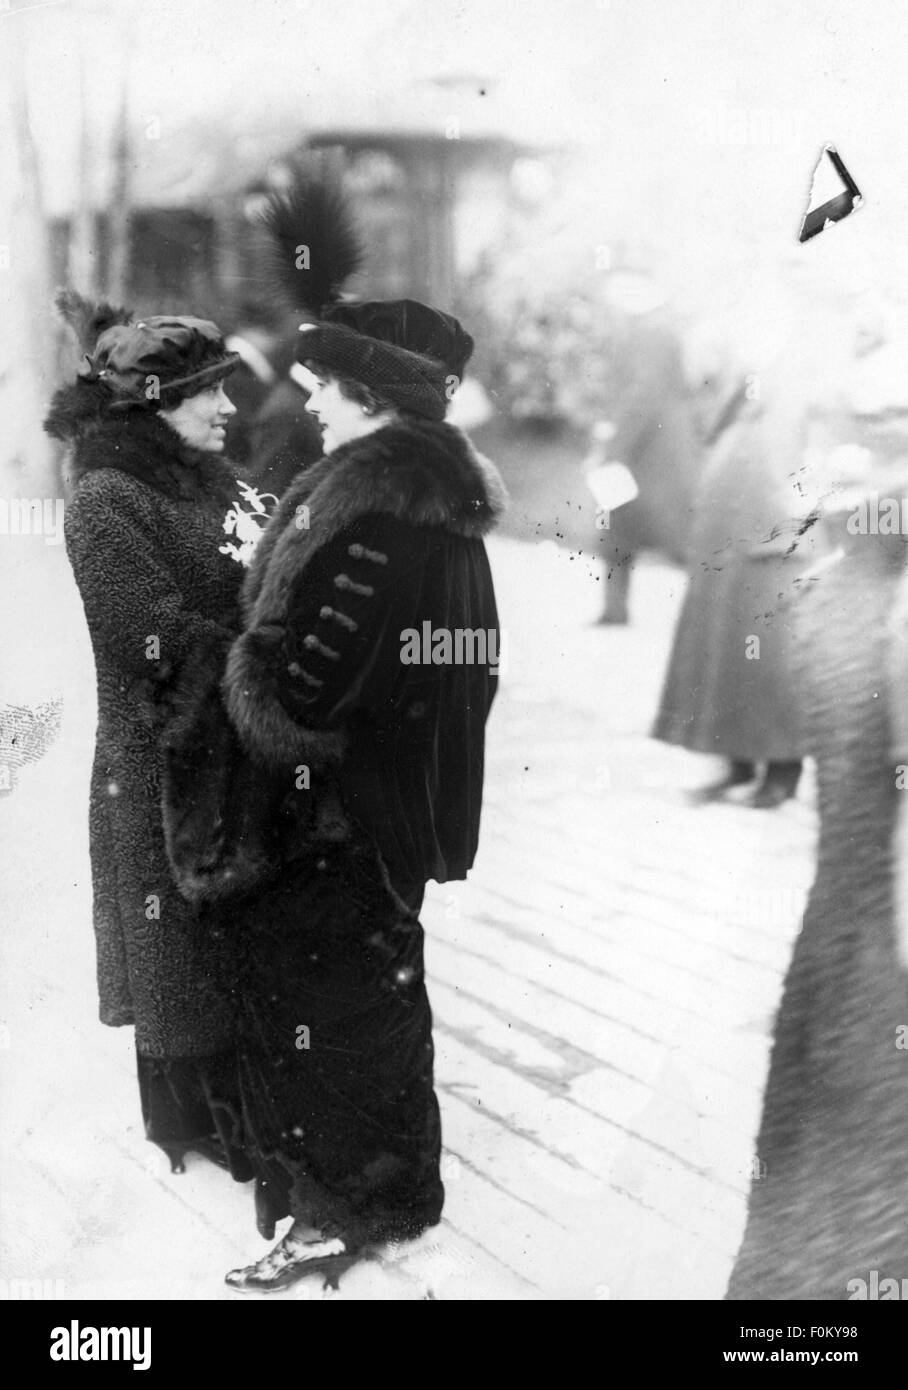 fashion, early 20th century / turn of the century, two ladies, Paris, circa 1910, Additional-Rights-Clearences-Not Available Stock Photo